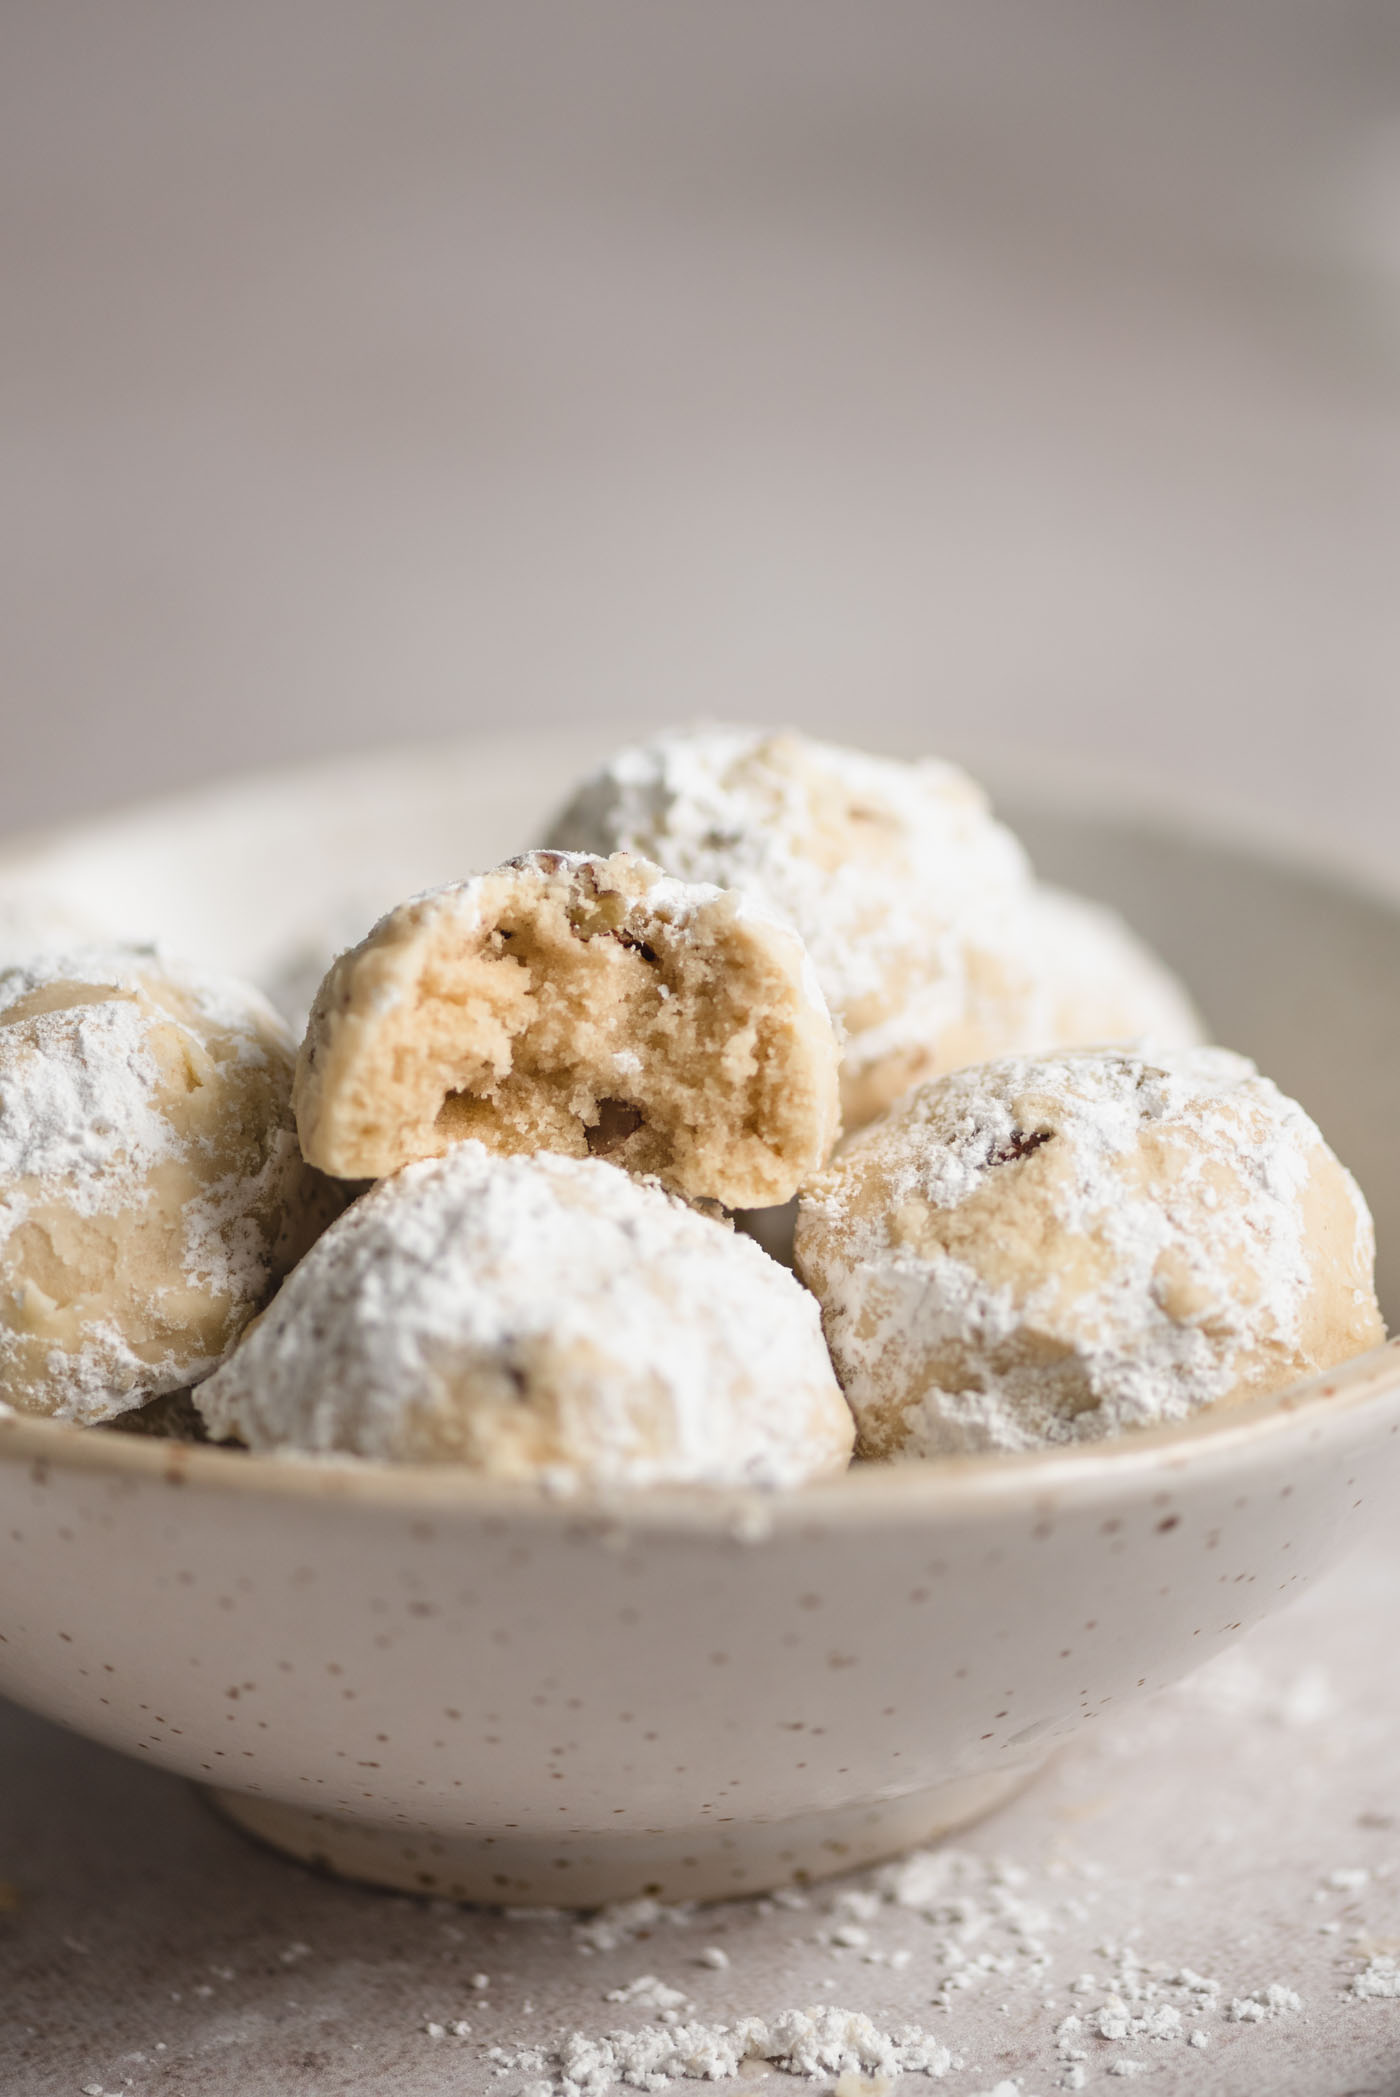 Pecan snowball cookies in a small bowl. The cookie on top has a bite out of it so you can see the inside texture.